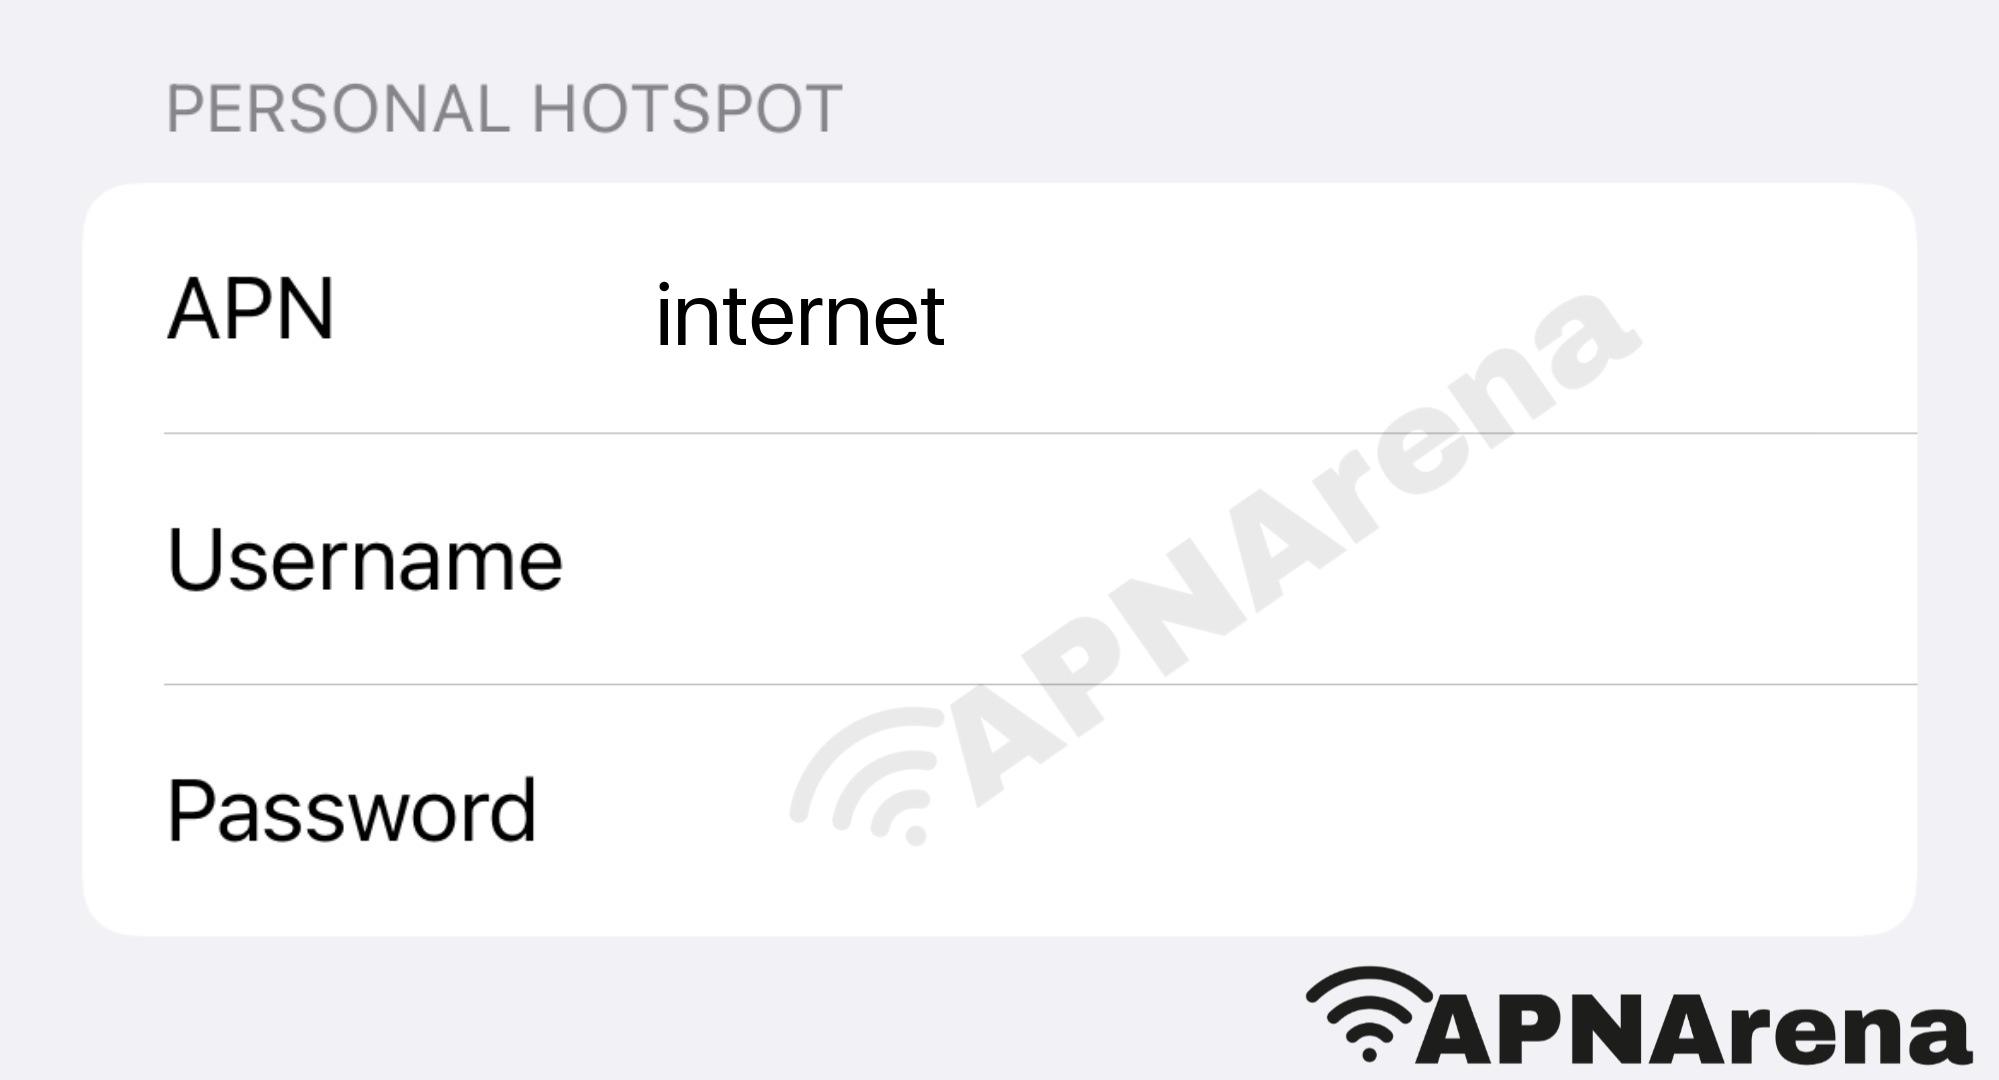 Touch Mobile Personal Hotspot Settings for iPhone